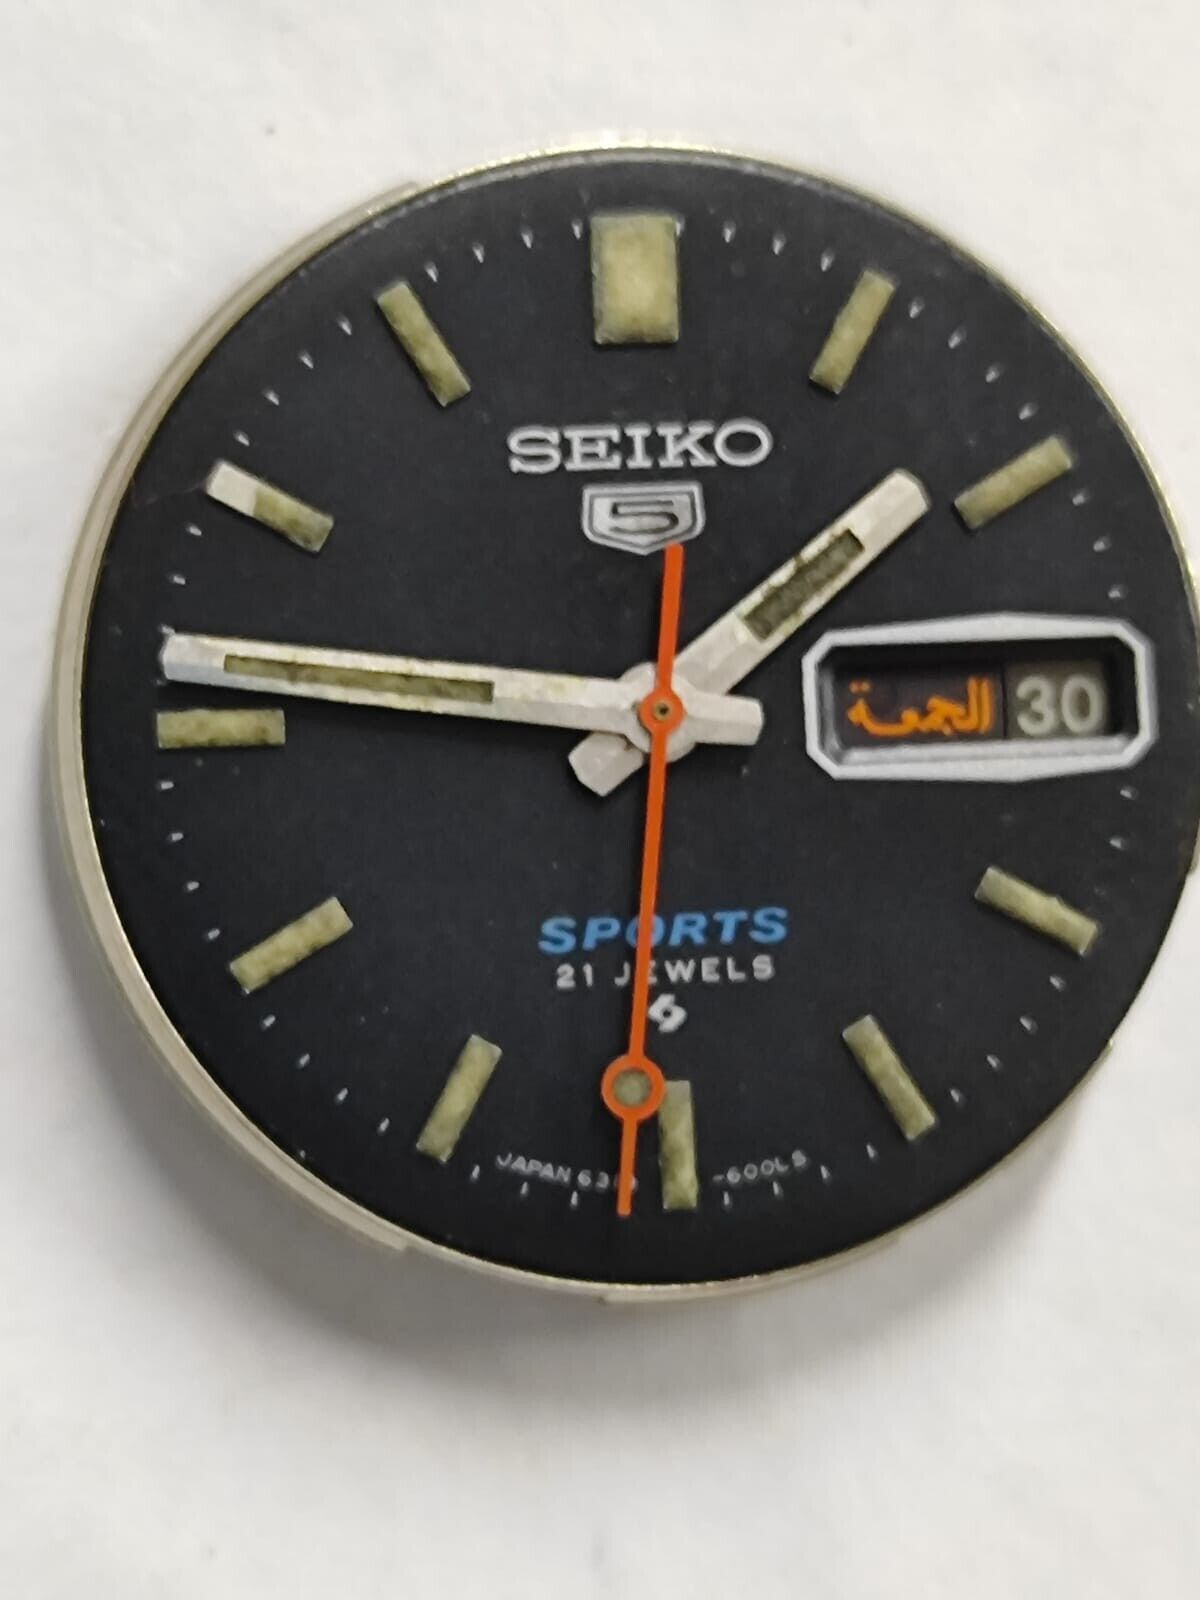 SEIKO 6319-6000 SPORTS Movement with Black Dial Working Used